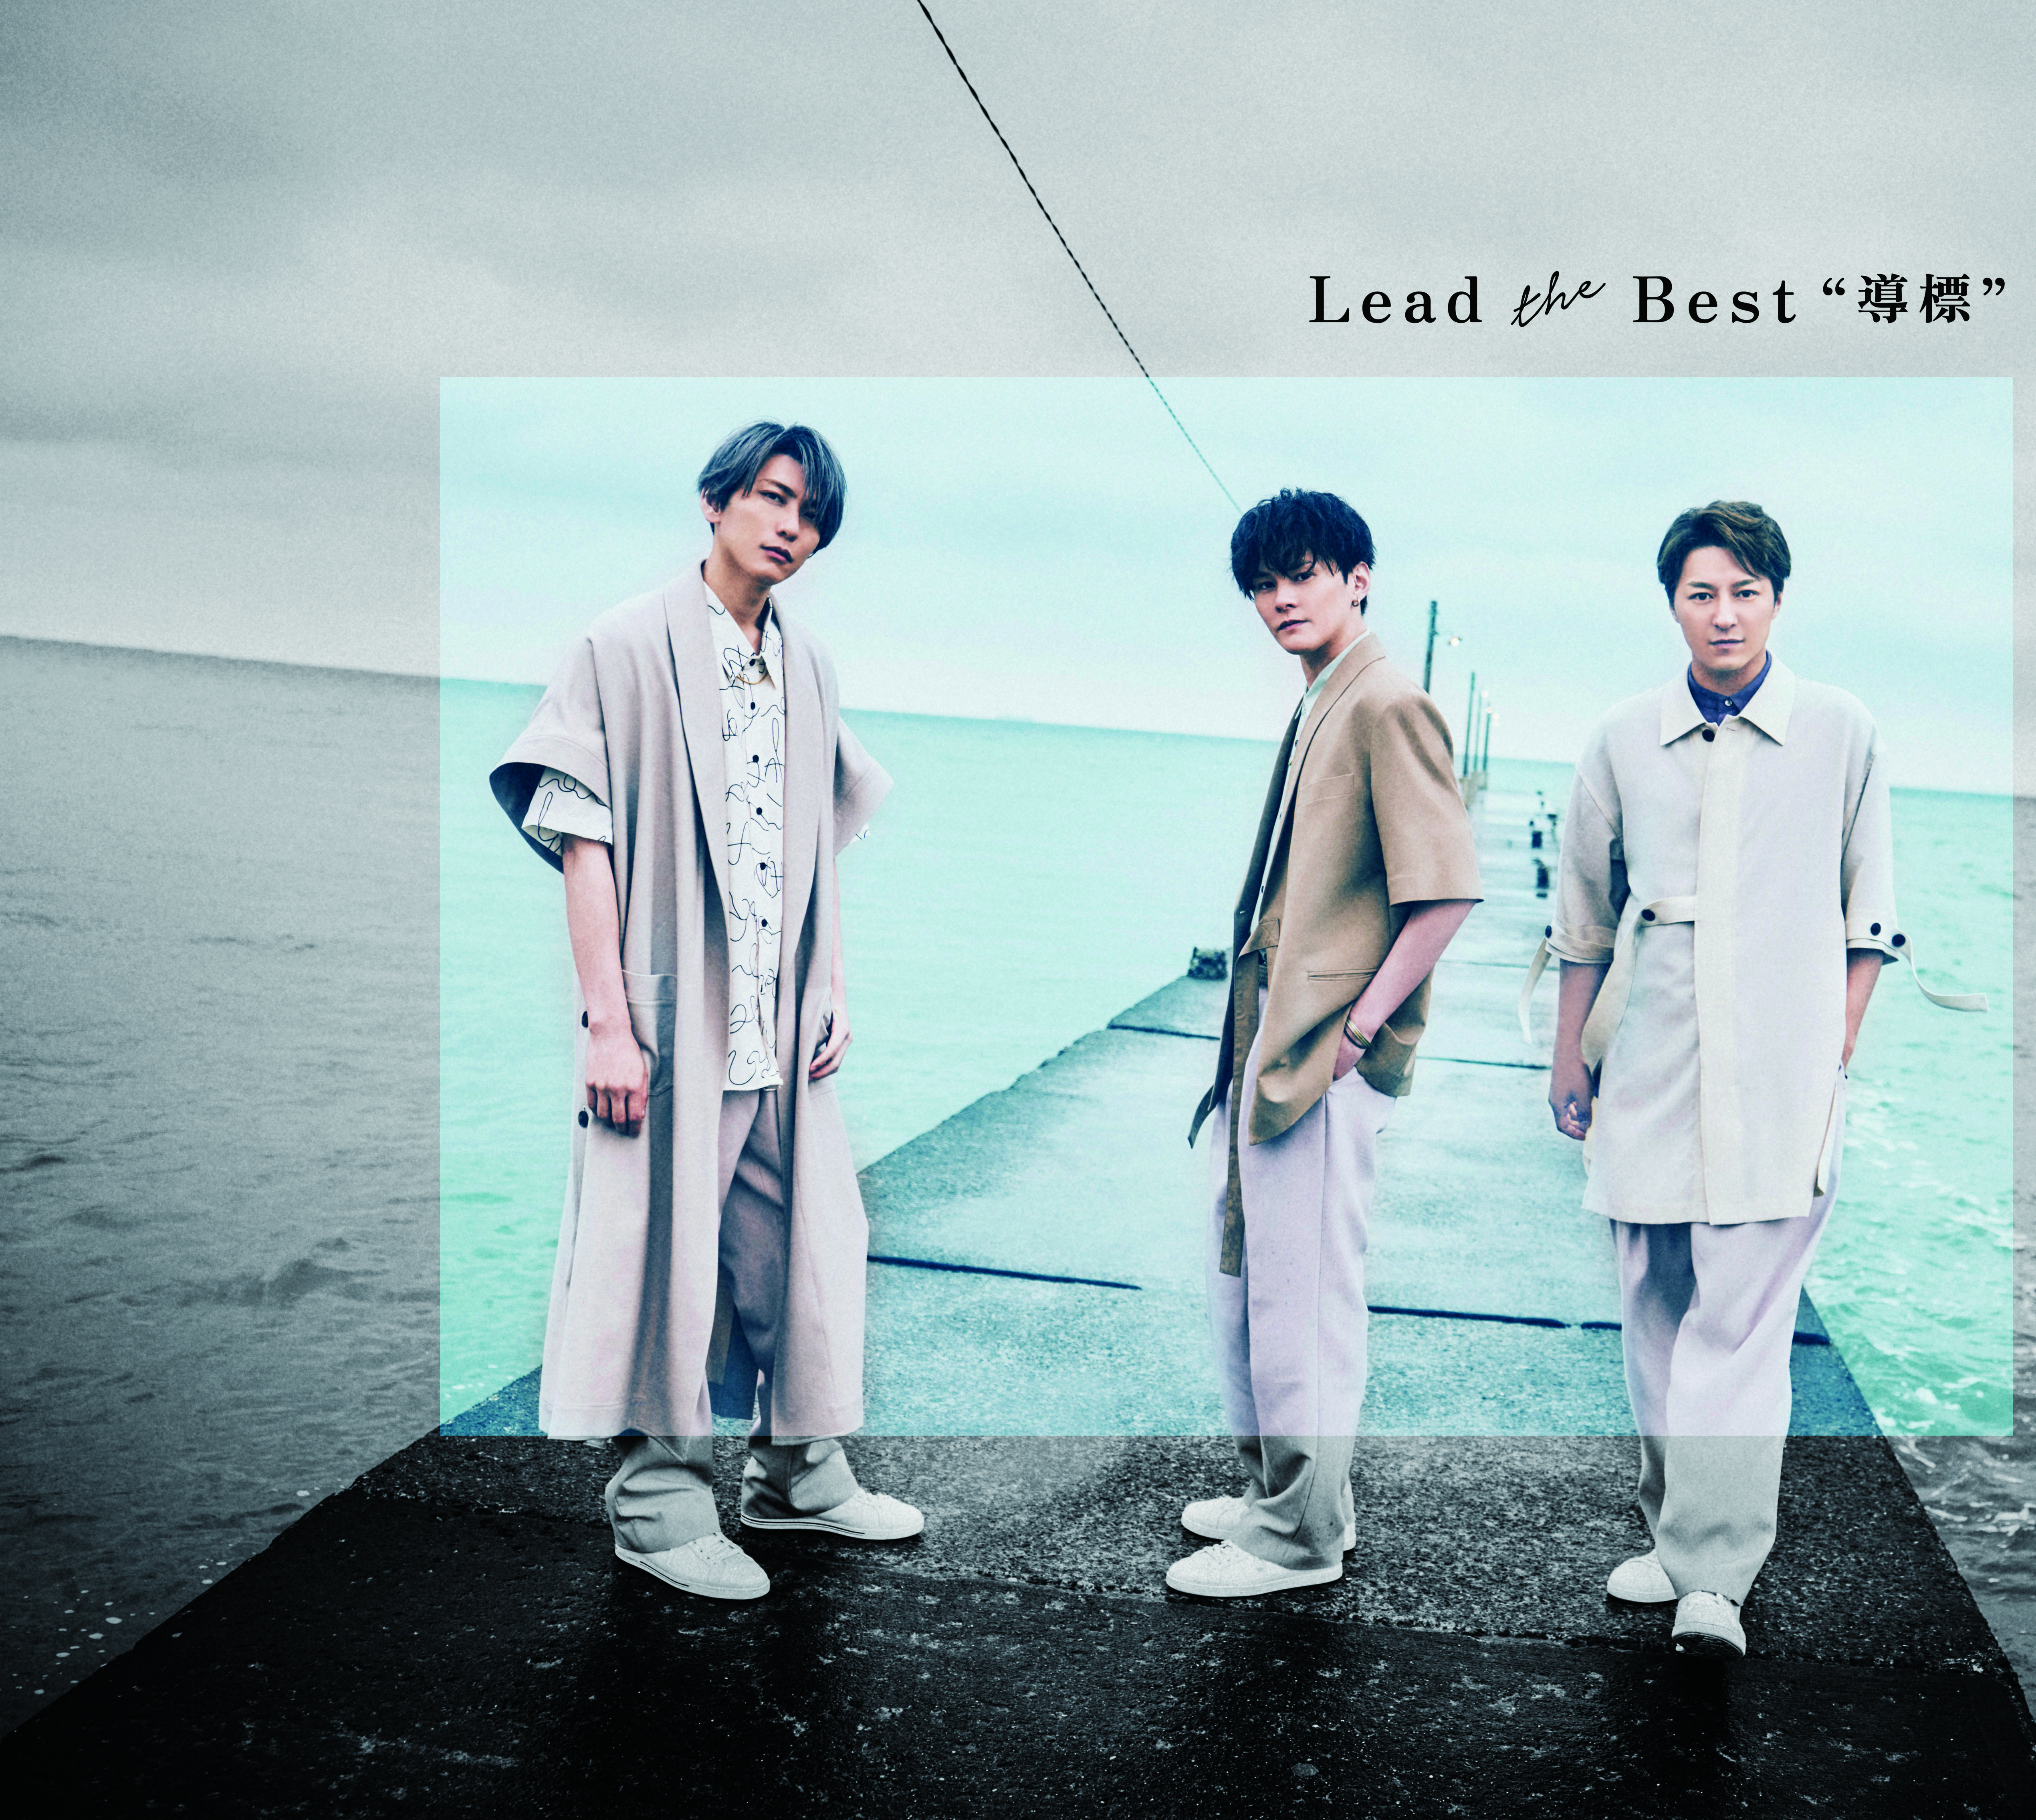 Lead the Best "Michishirube" Normal Edition (3CD) Release on July 31st,2022